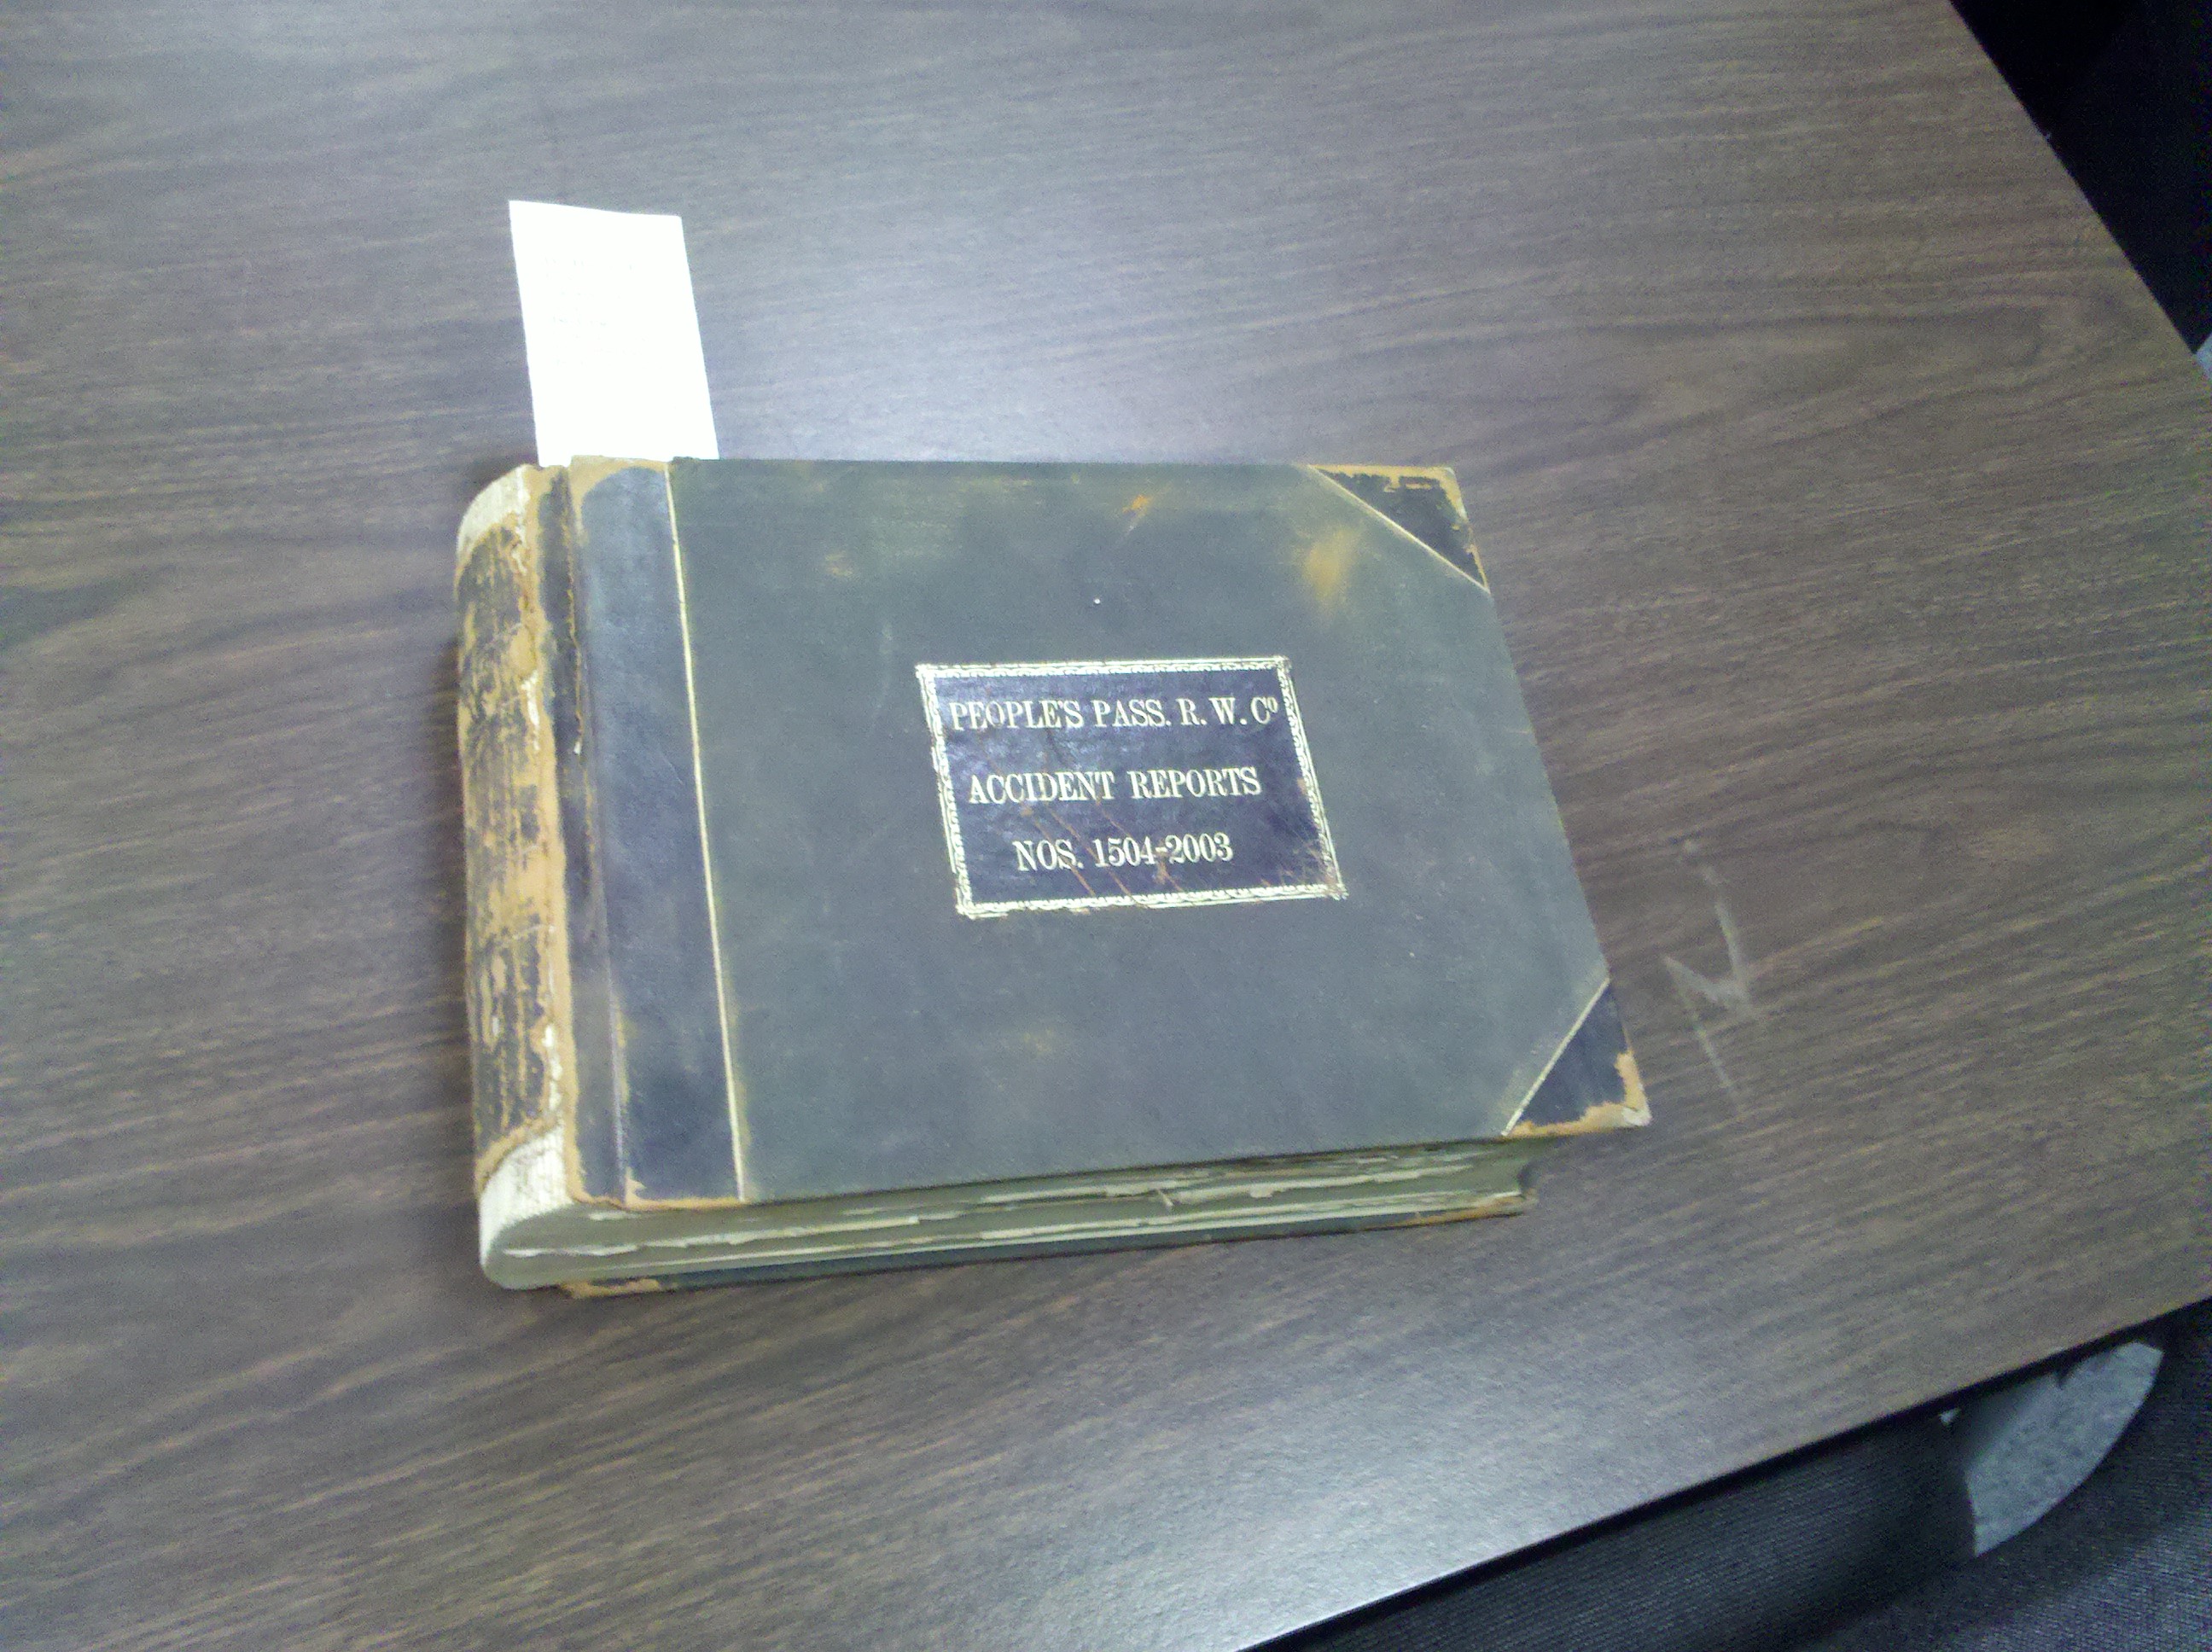 A 19th century collection of streetcar accident reports.